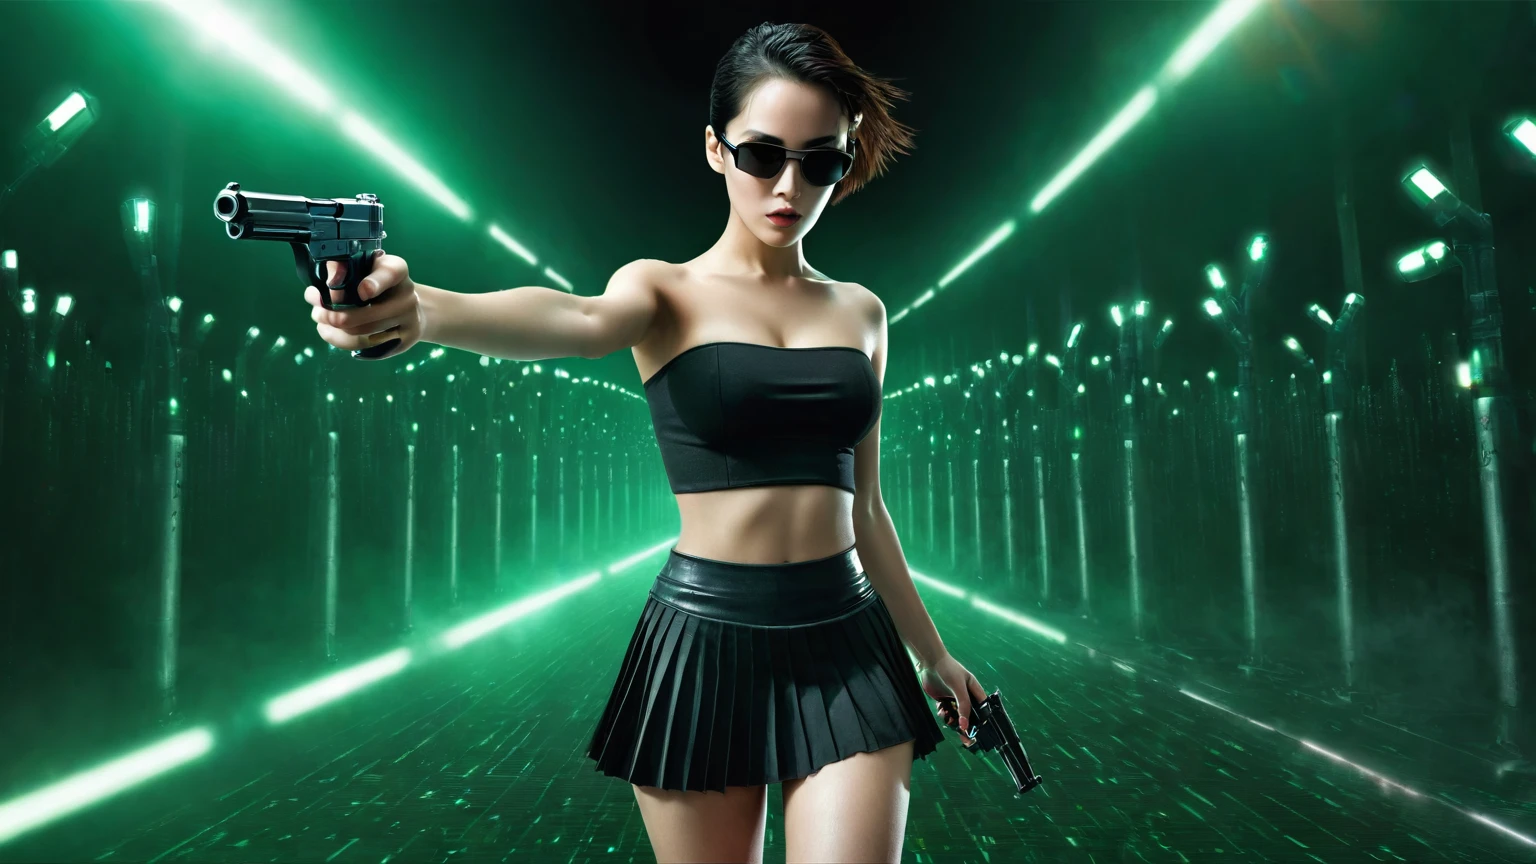 aerial view. sci-fi background. Matrix style, at night, dark sky, (1girl, solo))), photo realistic, (medium-breast:1.3 slim body, cleavage), (((tube top, very short pleated miniskirt))), (((((matrix style black sunglasses))))), (((aiming at camera with a mini pistol))), (looking at camera), (((((half-body thigh level medium shot))))), (cinematic lighting).